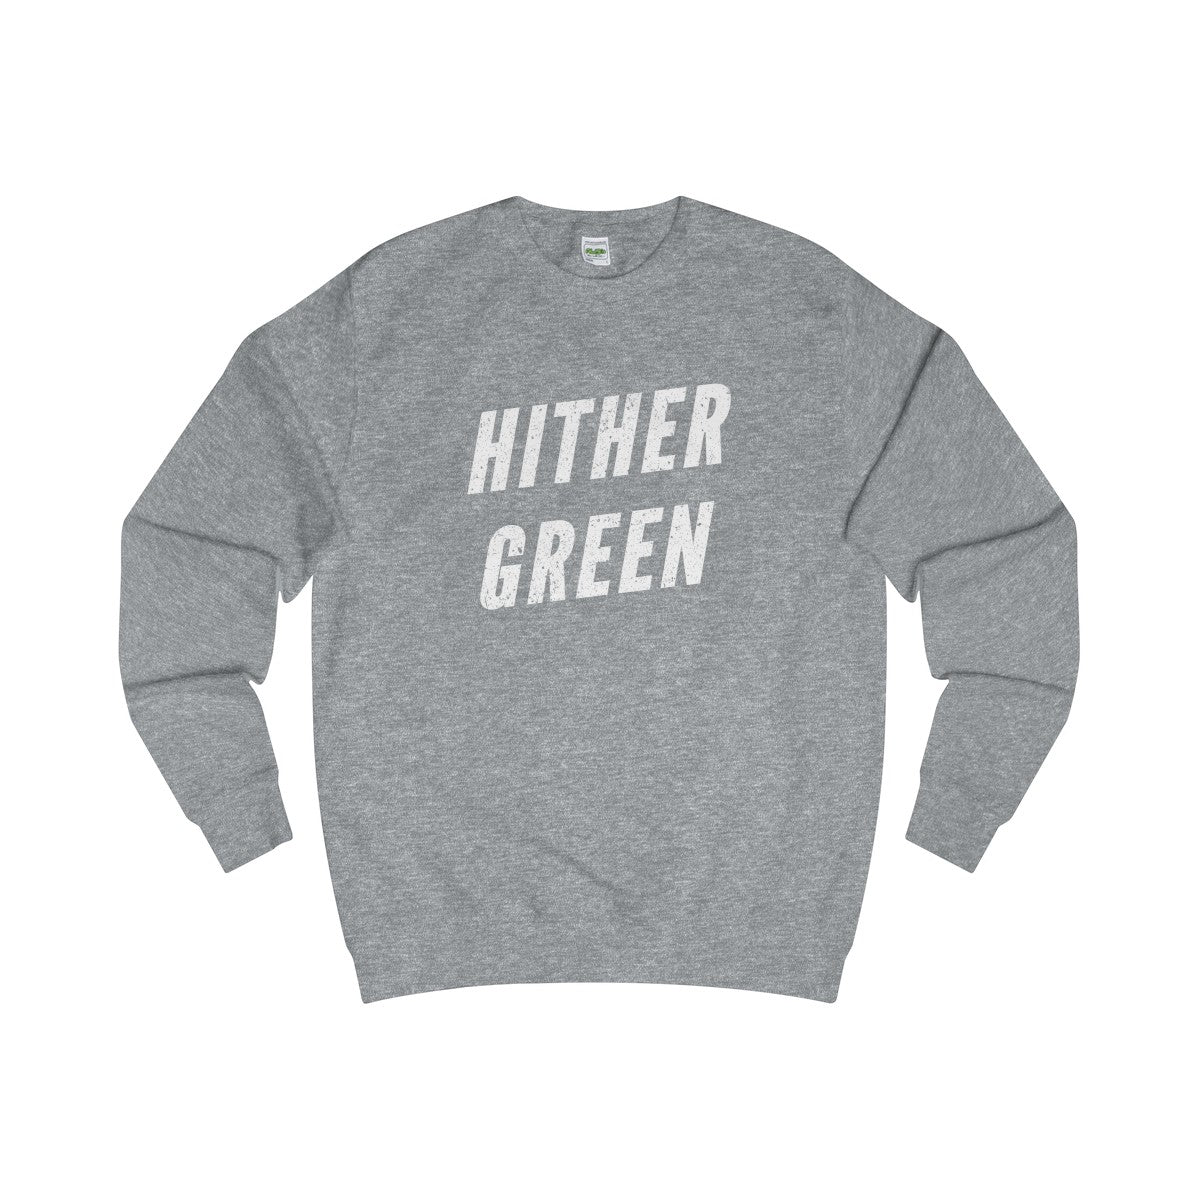 Hither Green Sweater